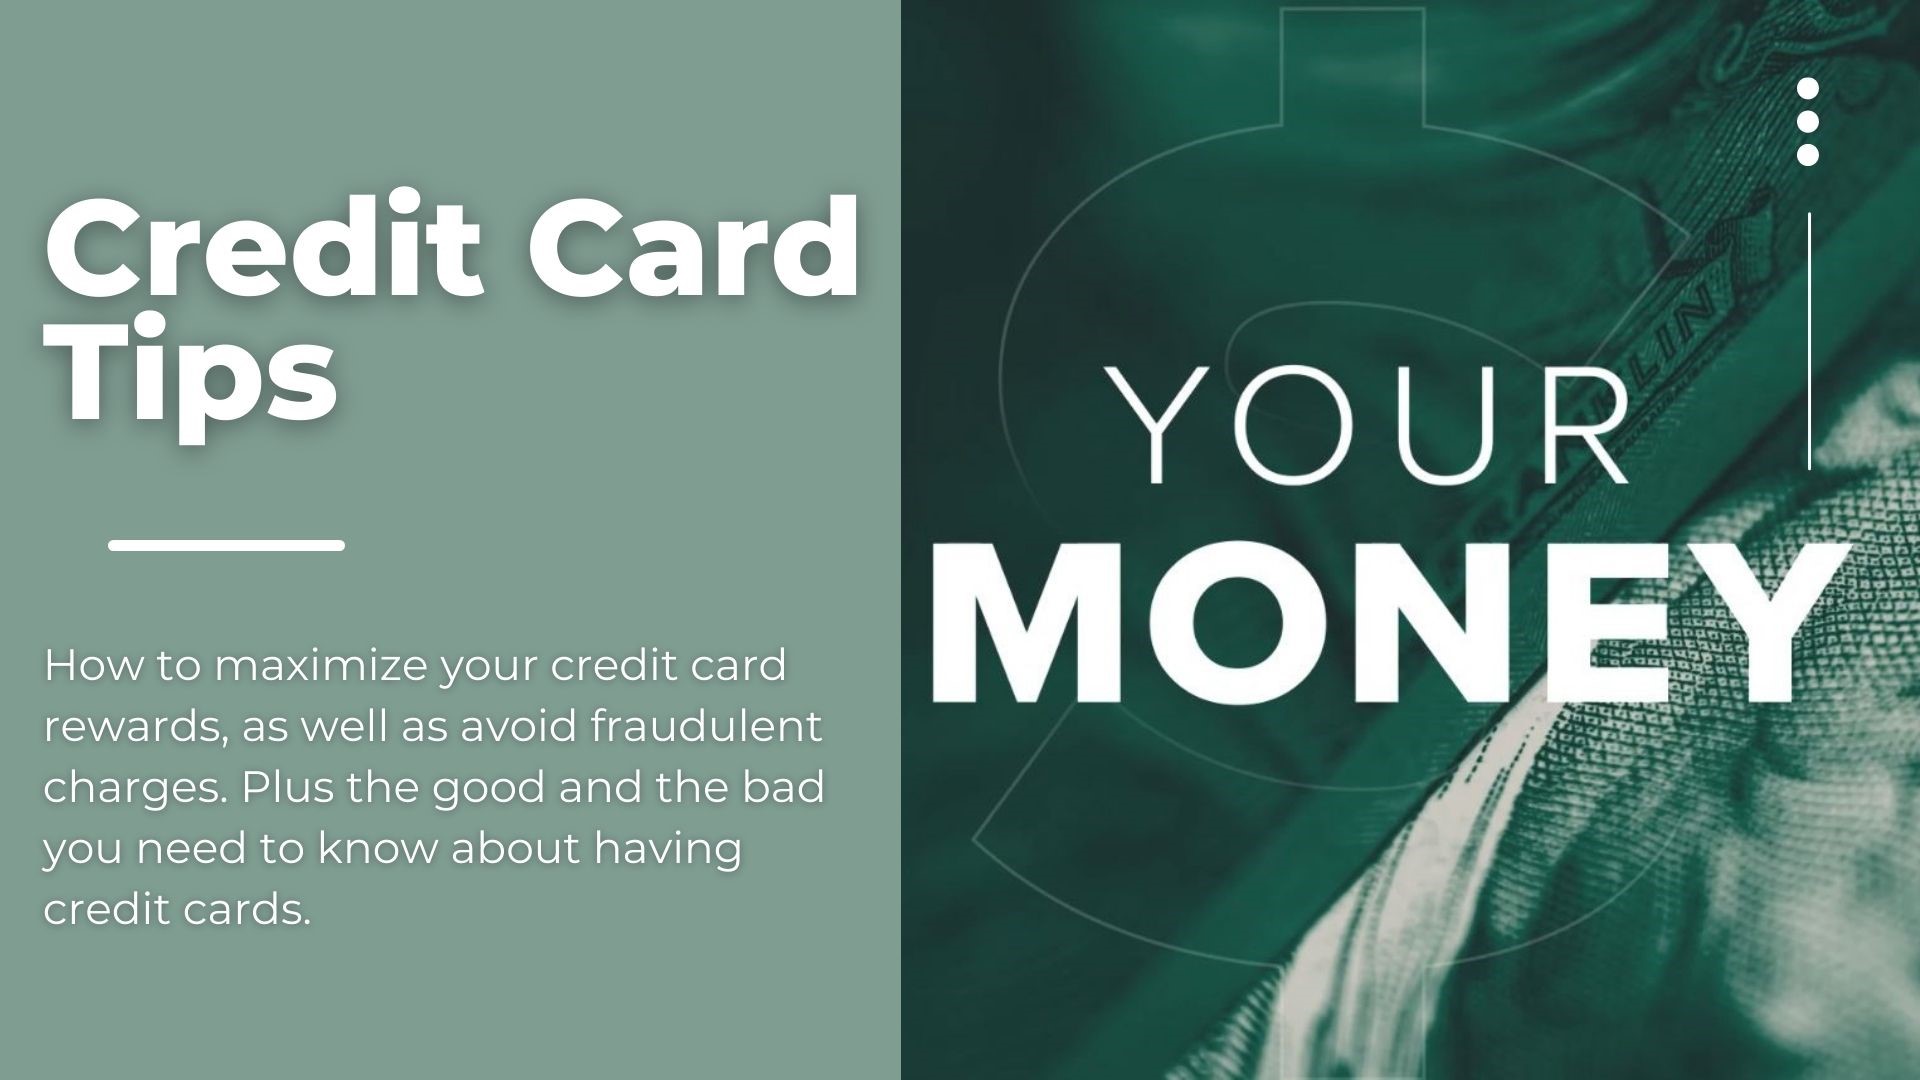 In this edition of Your Money we look at the good and bad of credit cards from maximizing rewards to how to lower your interest rate.